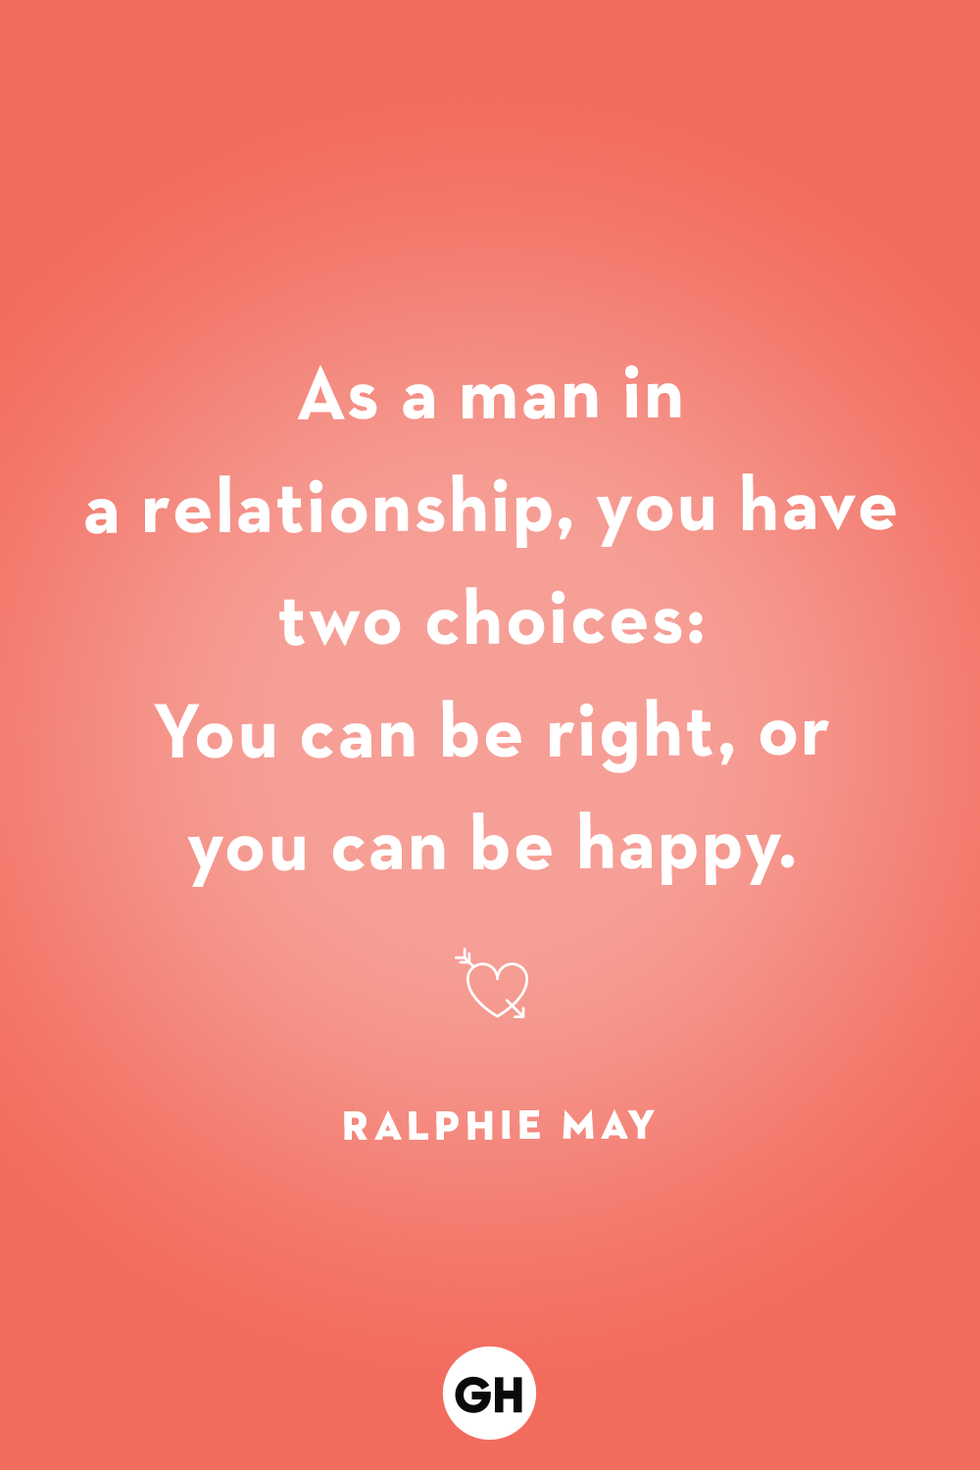 as a man in a relationship, you have two choices you can be right or you can be happy ralphie may